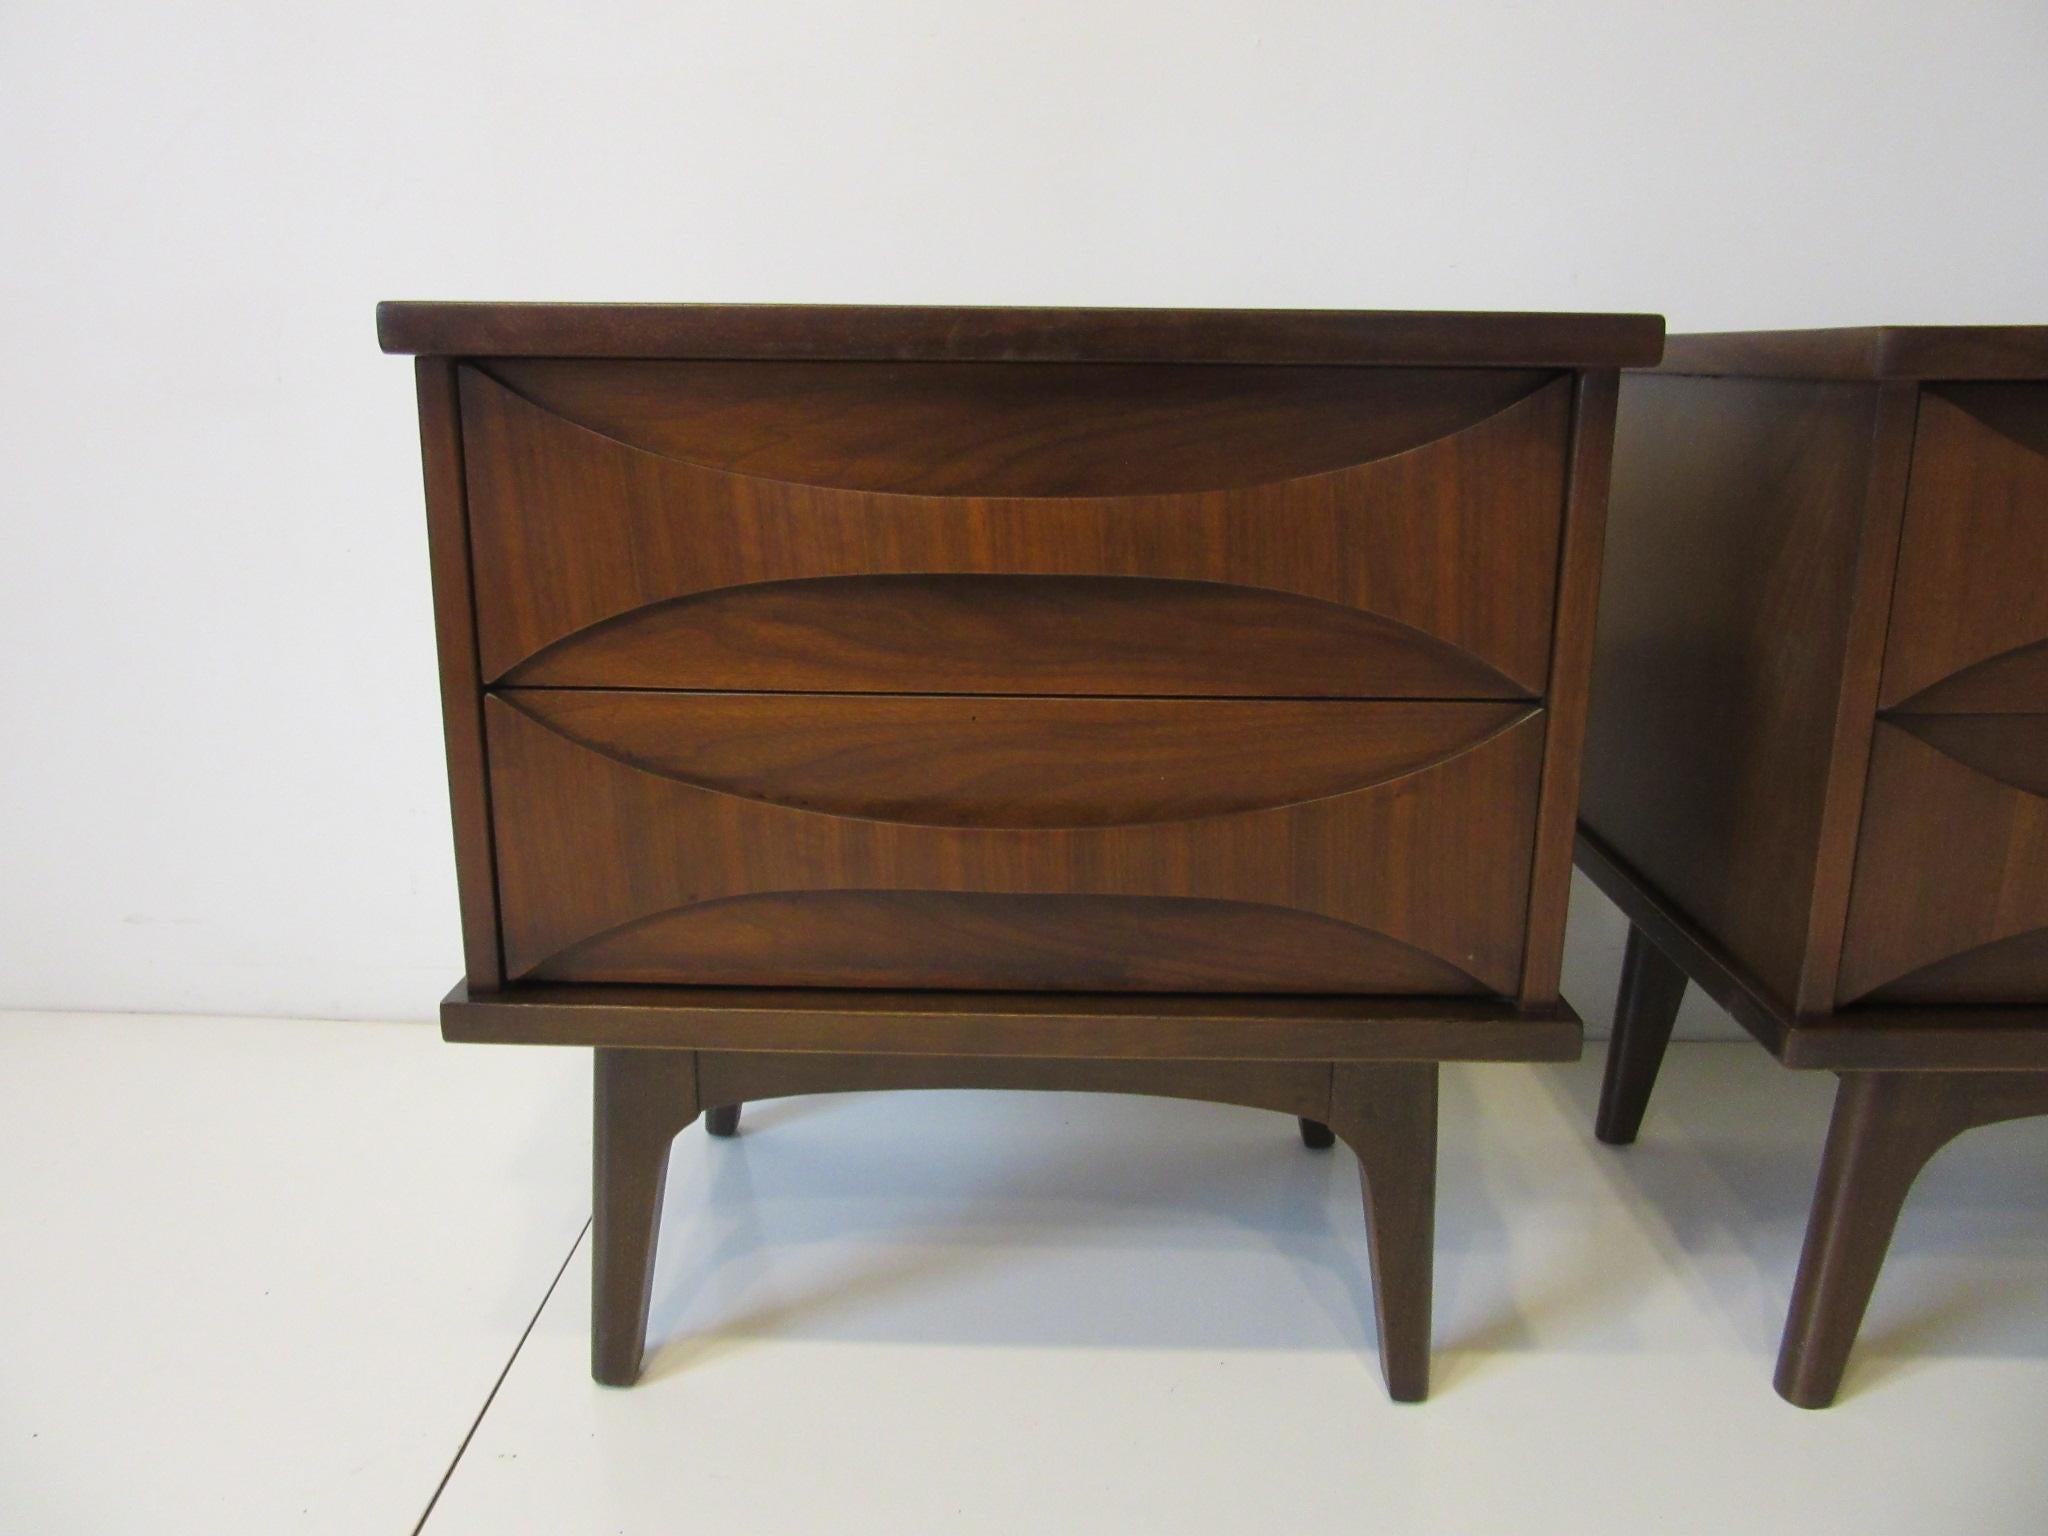 A pair of dark walnut nightstands with two drawers having cat eye styled fronts serving as pulls. Sitting on sturdy solid legs and styled in the manner of Brasilla and Perspecta furniture.